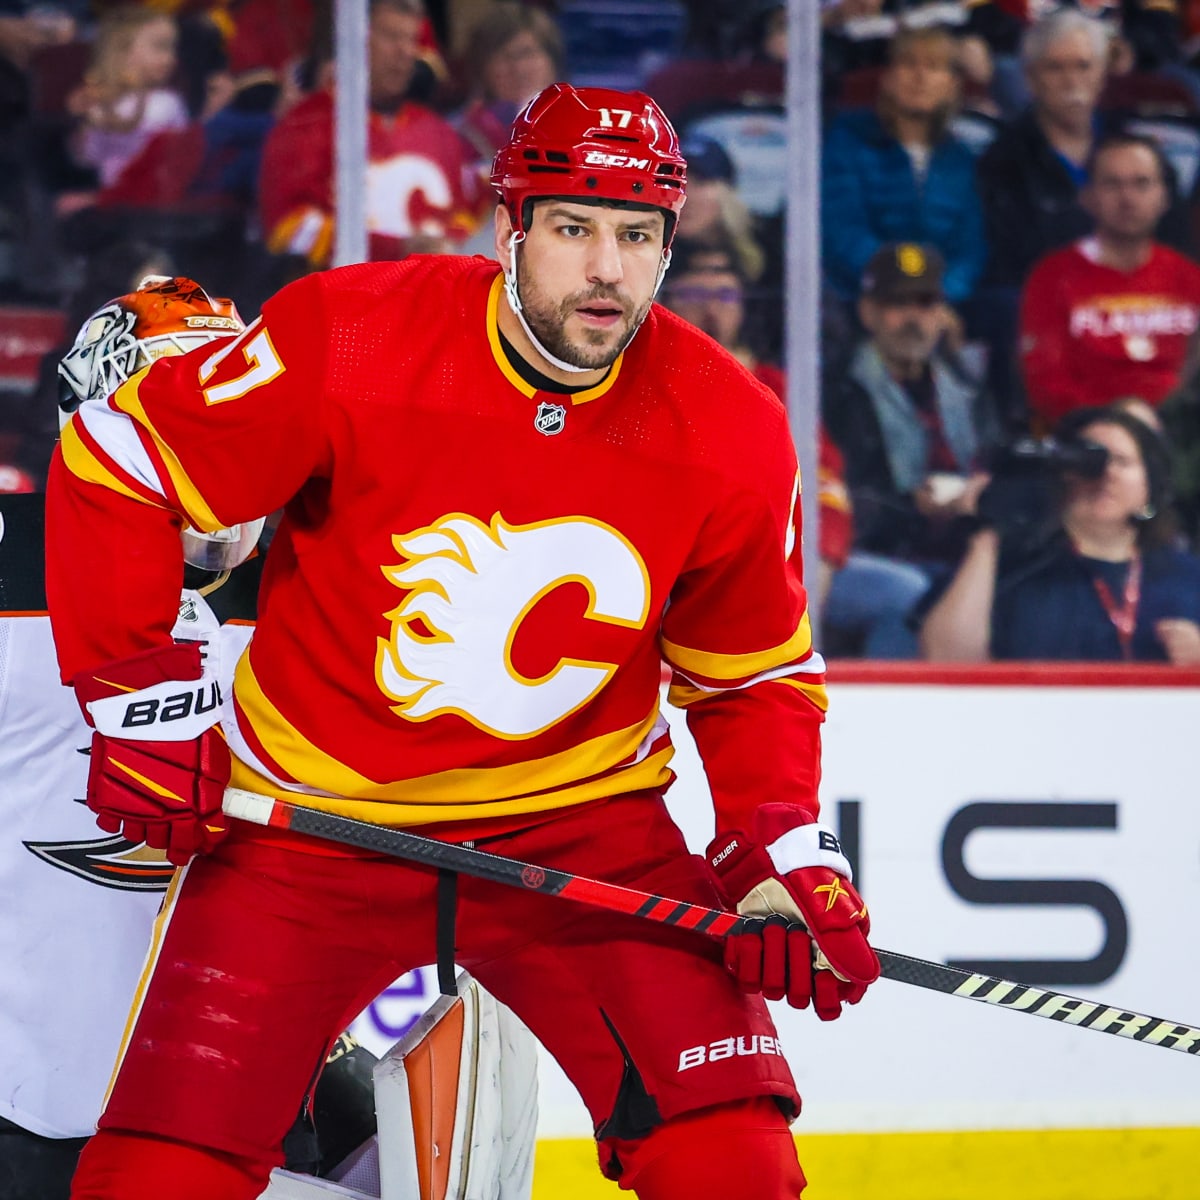 Report: Calgary Flames give pending UFA Milan Lucic permission to speak  with other teams - Daily Faceoff